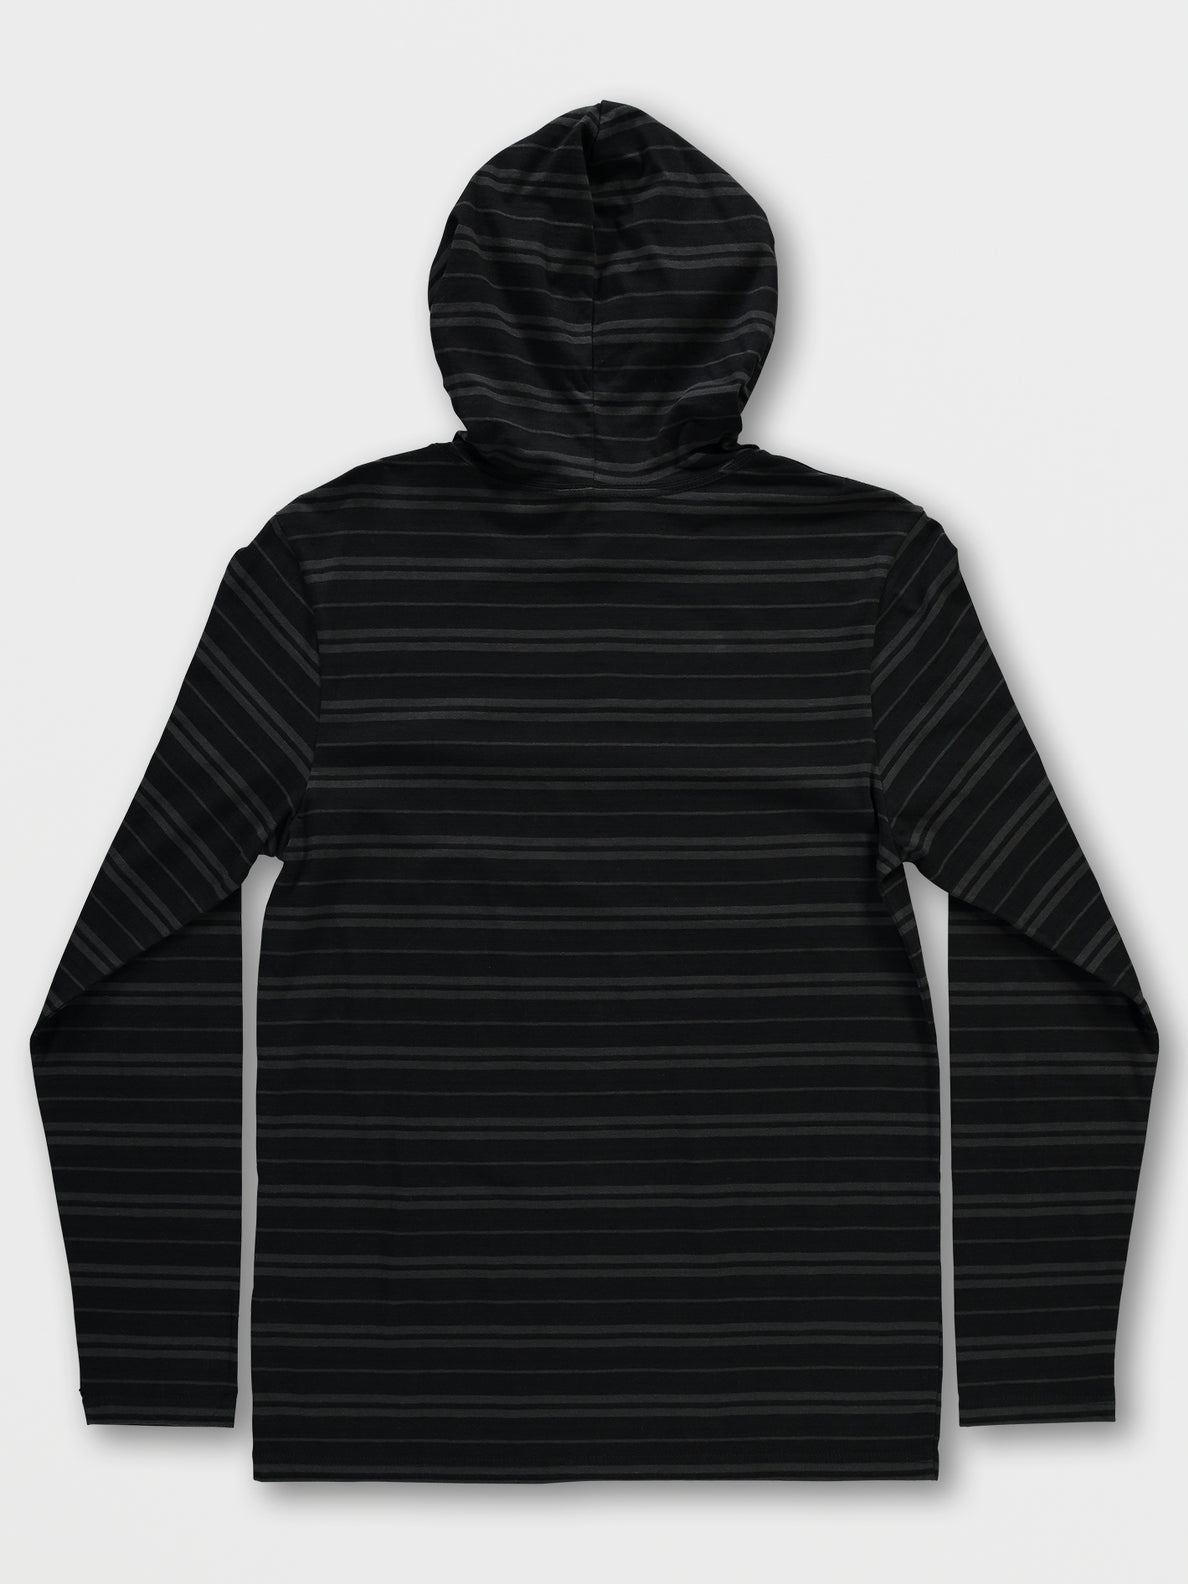 Parables Striped Hooded Shirt - Black